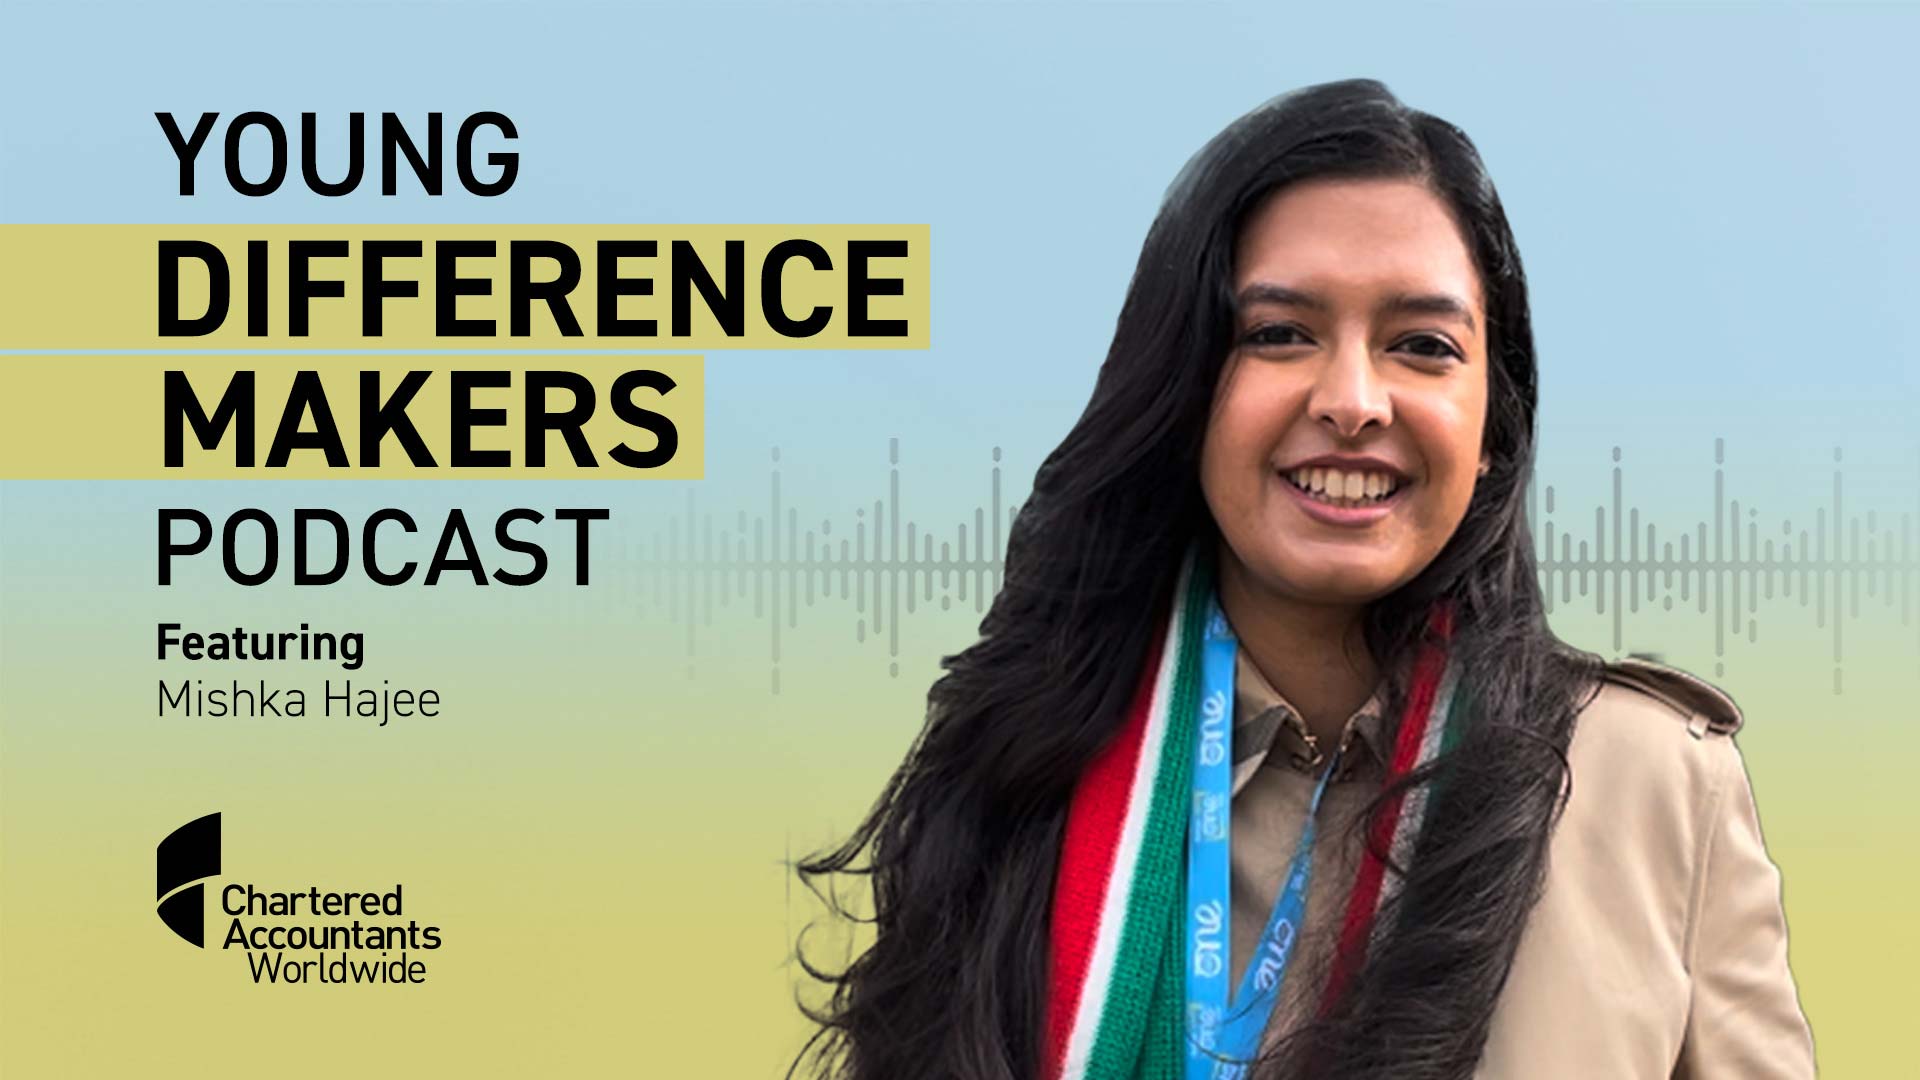 Young Difference Makers, Mishka Hajee